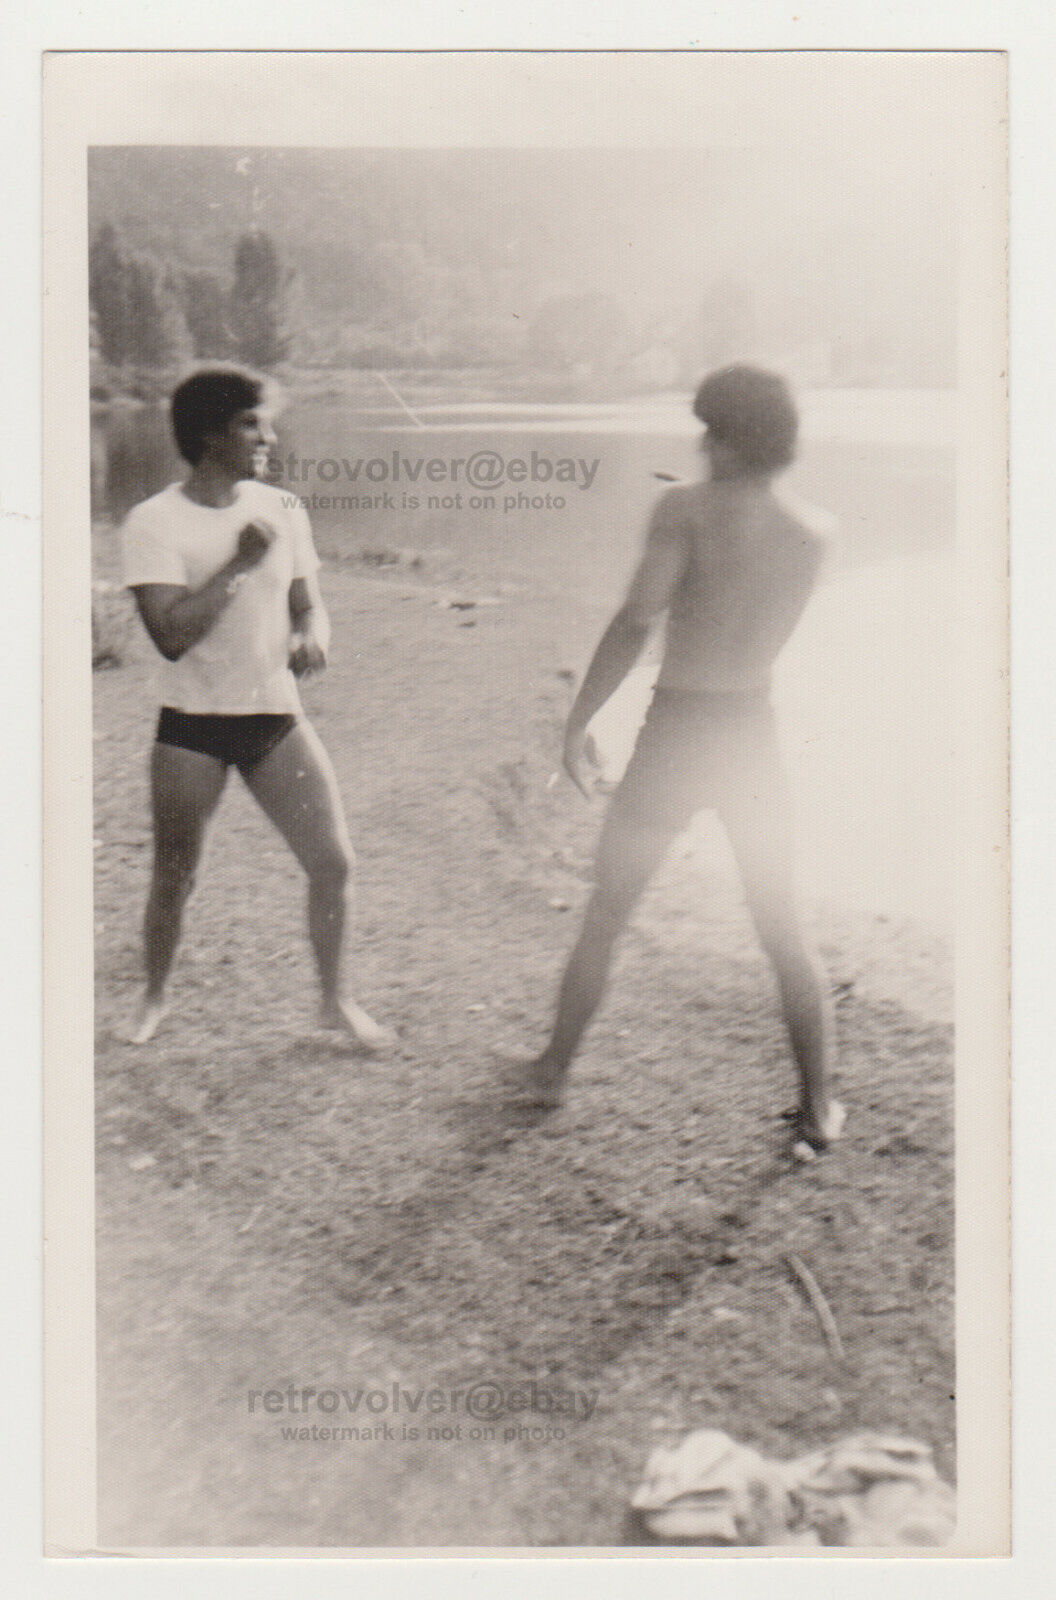 Two Affectionate Handsome Young Men Beach Shirtles Trunks Gay Int Snapshot Photo